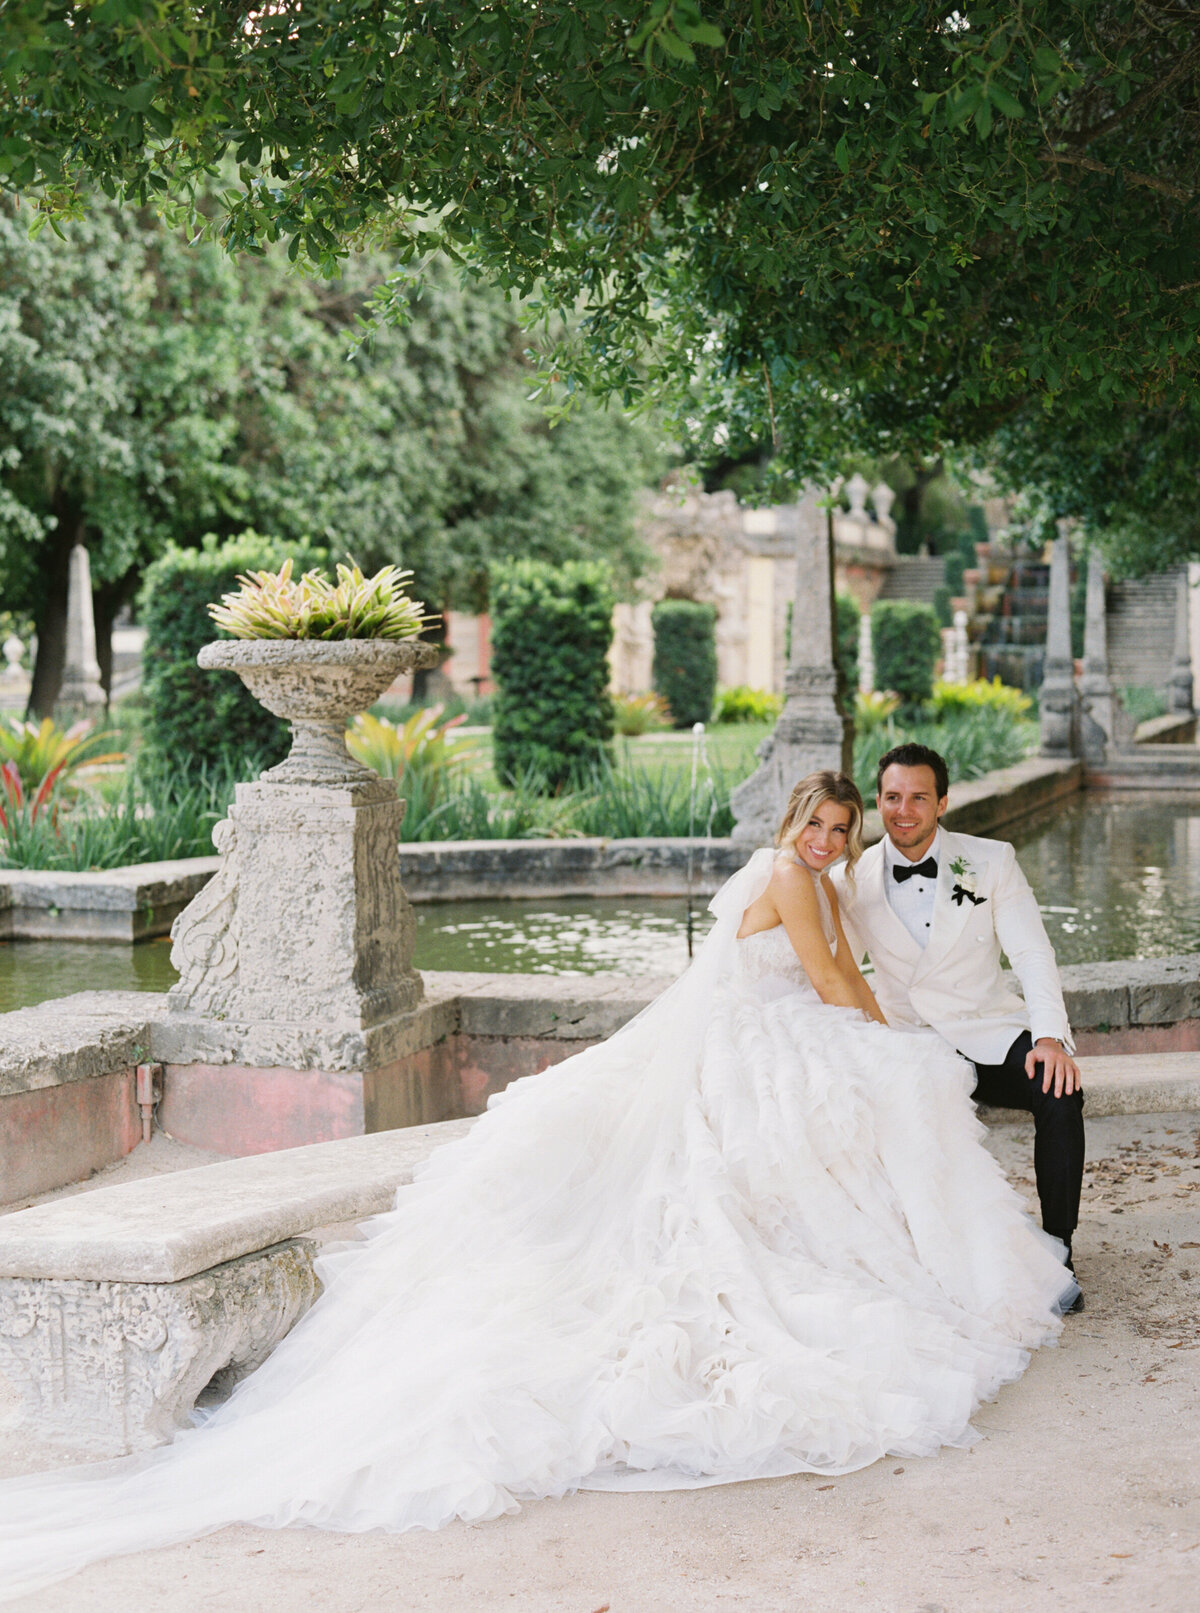 Liz Andolina Photography Destination Wedding Photographer in Italy, New York, Across the East Coast Editorial, heritage-quality images for stylish couples 30239_13